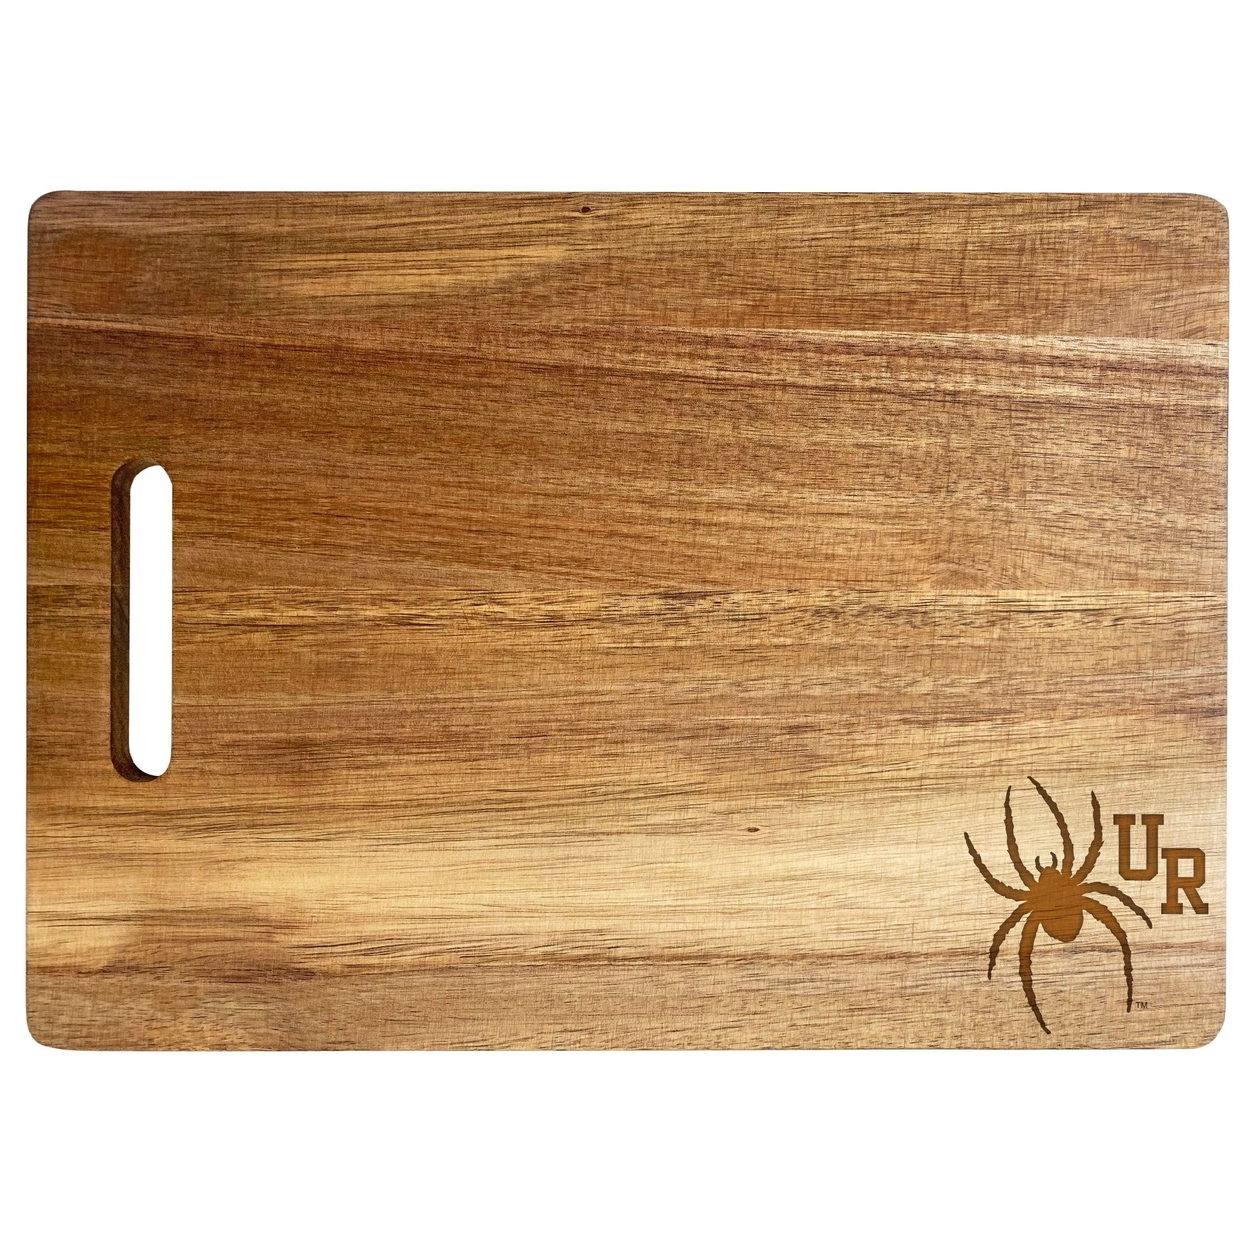 Richmond Spiders Engraved Wooden Cutting Board 10 X 14 Acacia Wood - Small Engraving